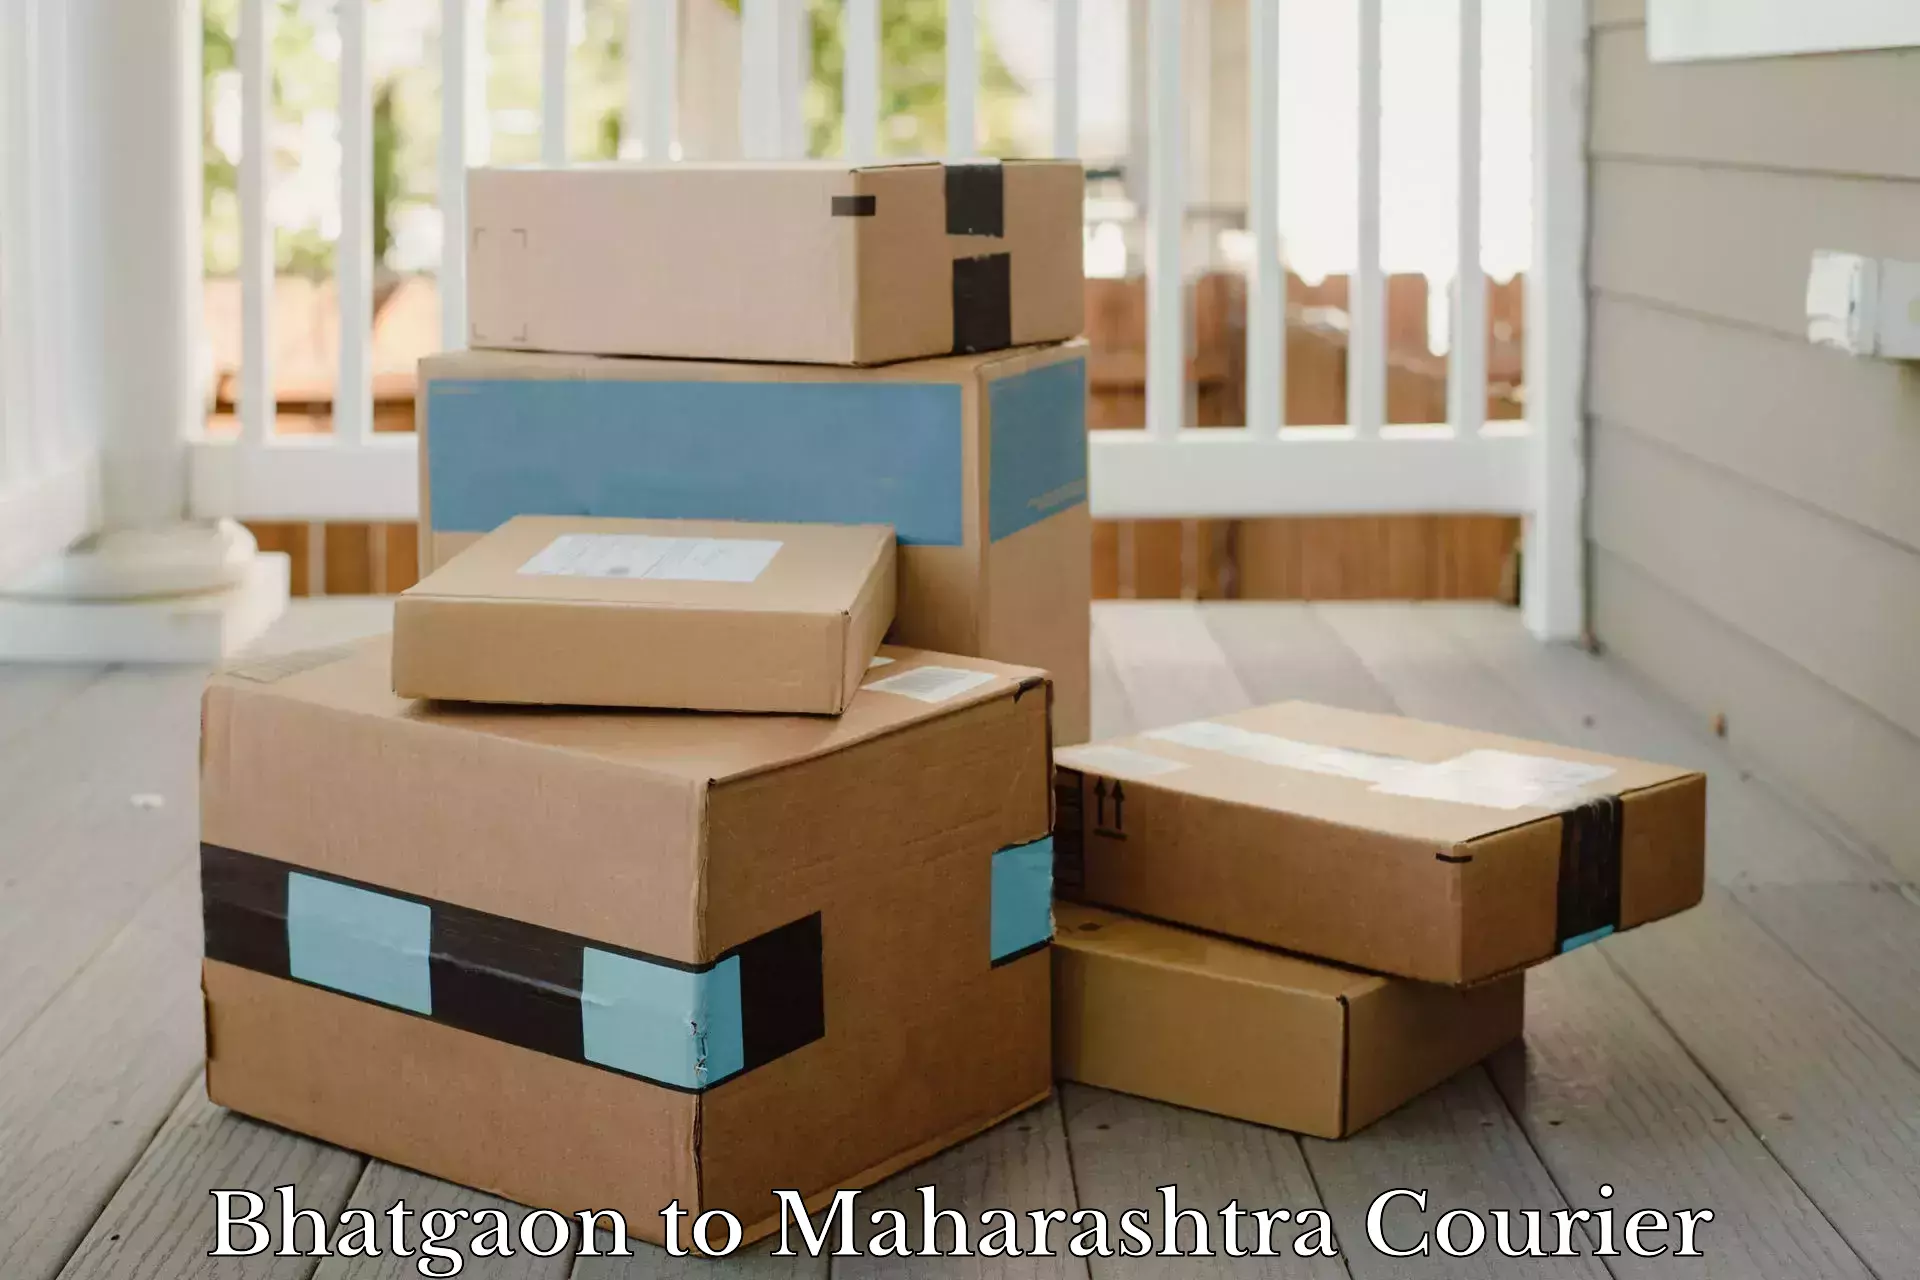 Reliable courier service in Bhatgaon to Sengaon